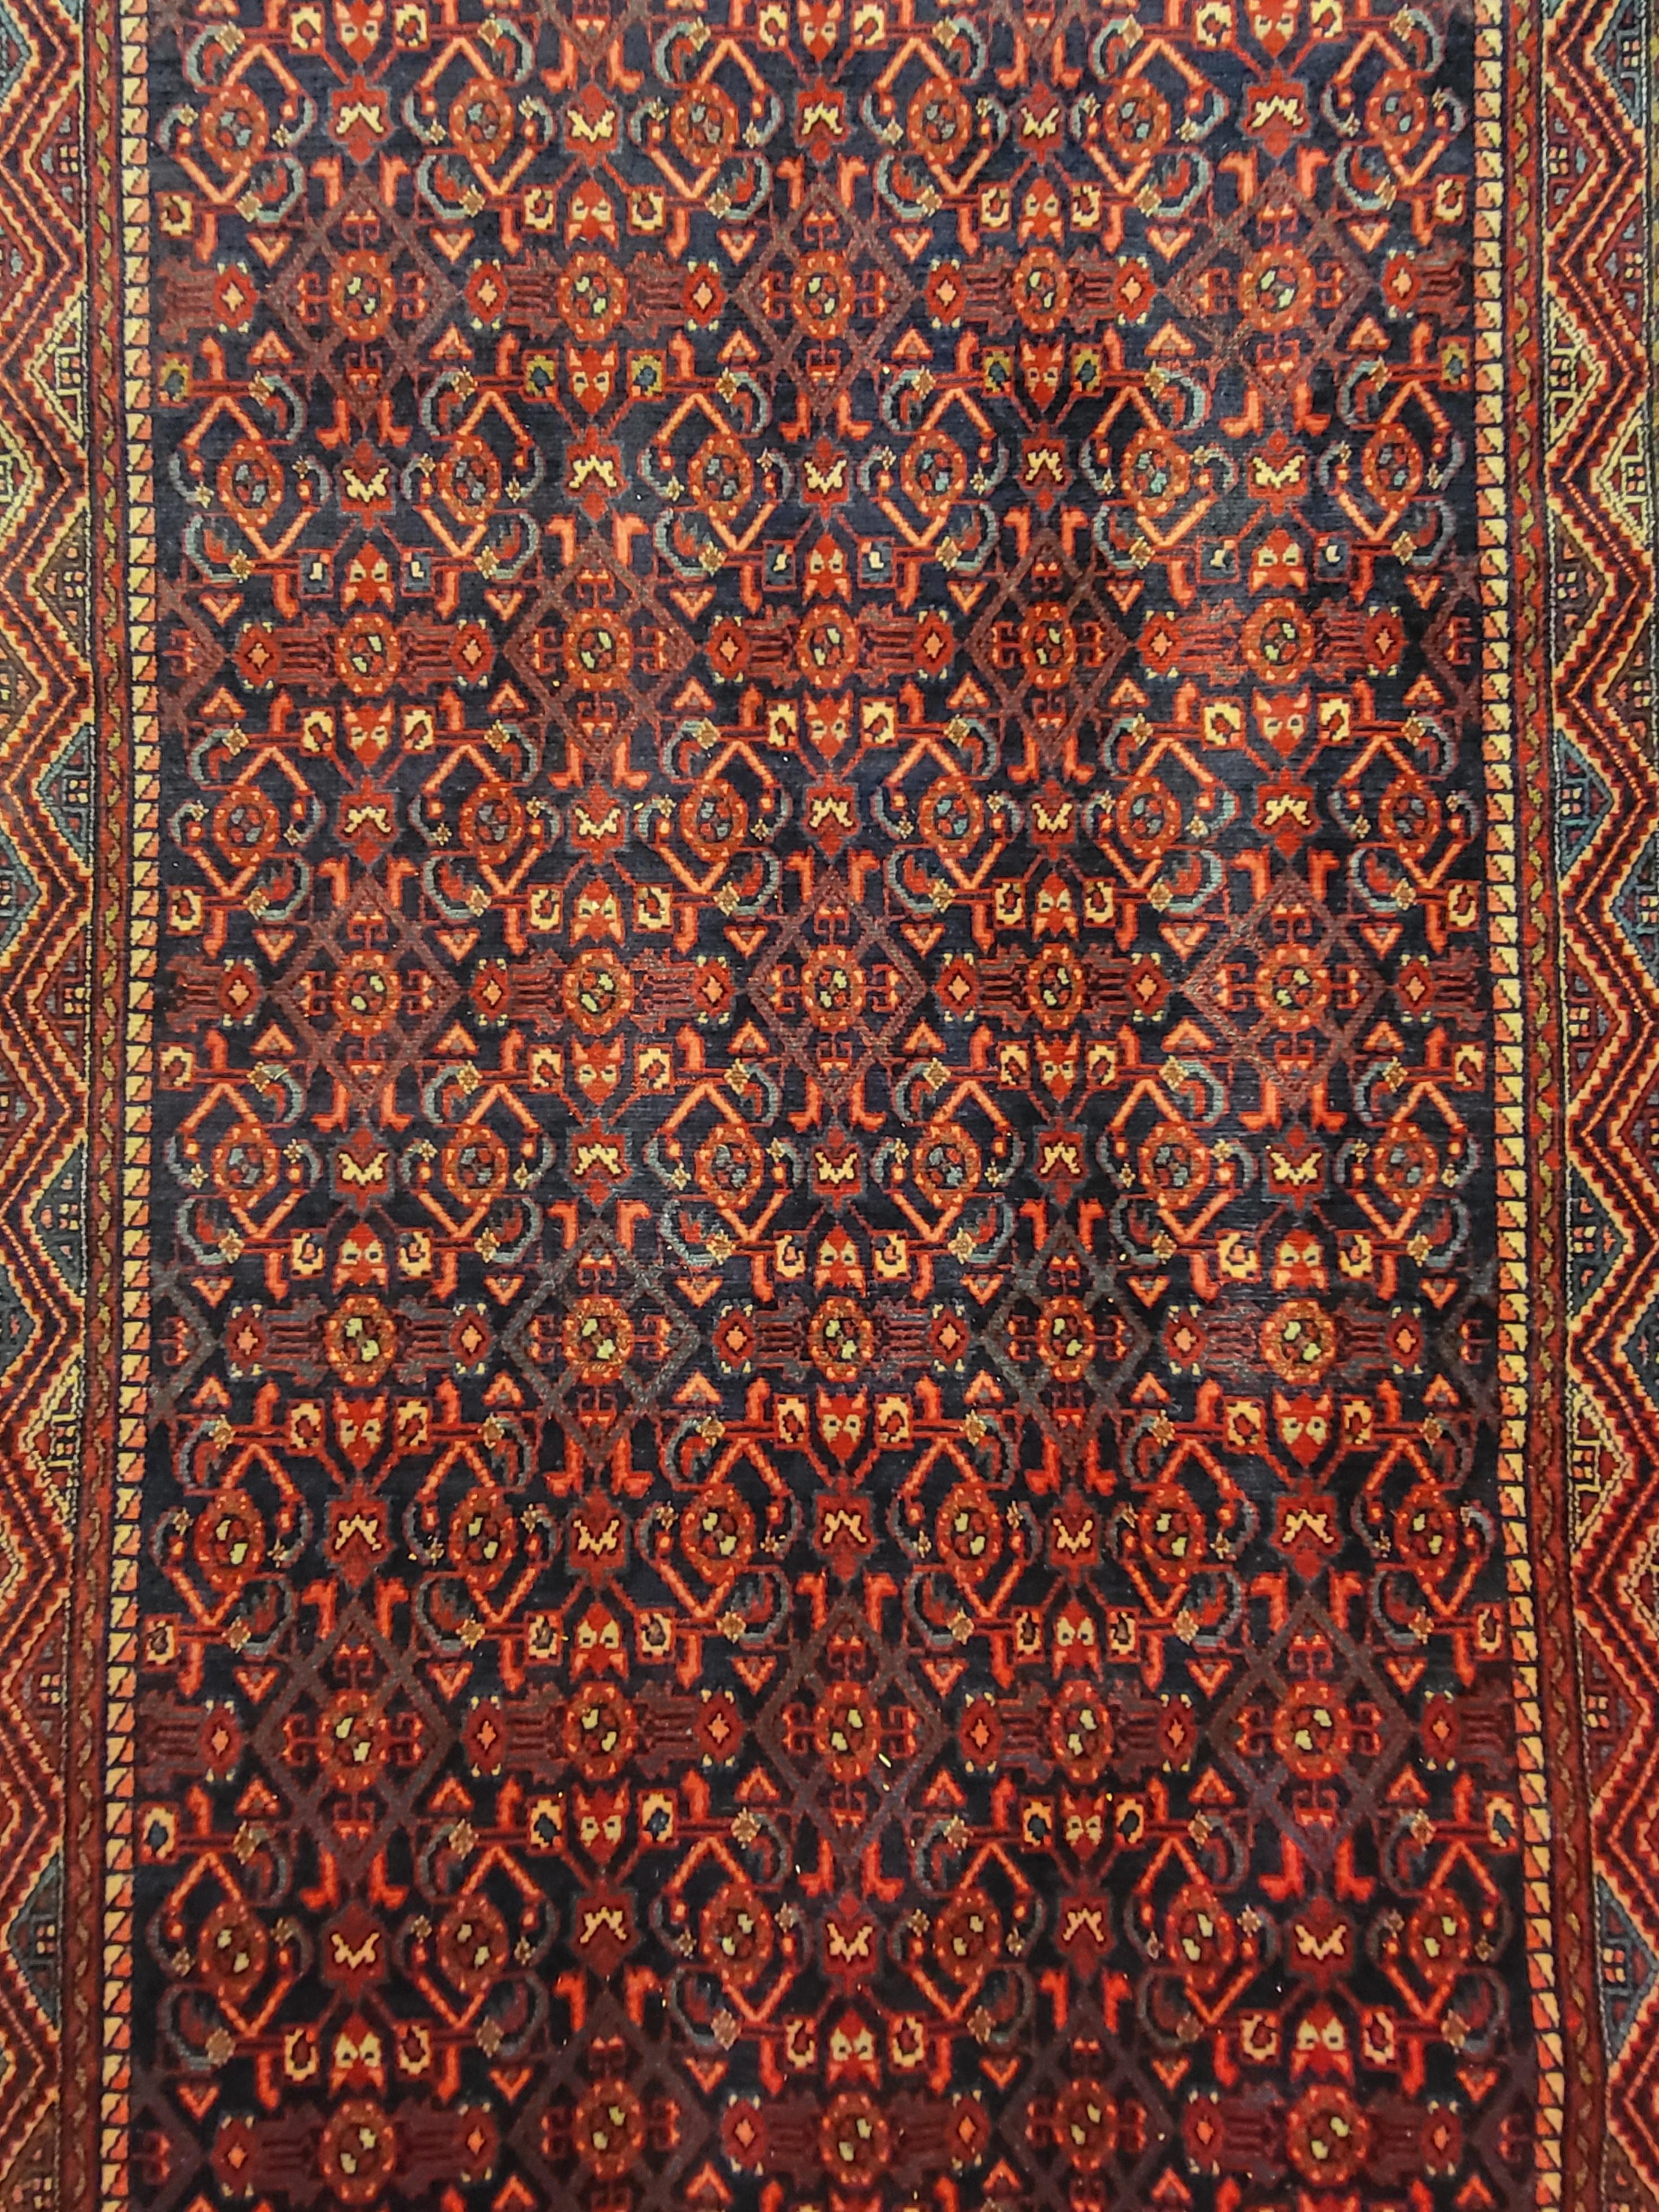 Intricate Antique Malayer Runner

3ft 6in x 13ft

Absolutely stunning Persian Runner woven in the famous area of Malayer.

Malayer is known for their beautiful tribal designs that have become highly sought after by collectors. Because they're so